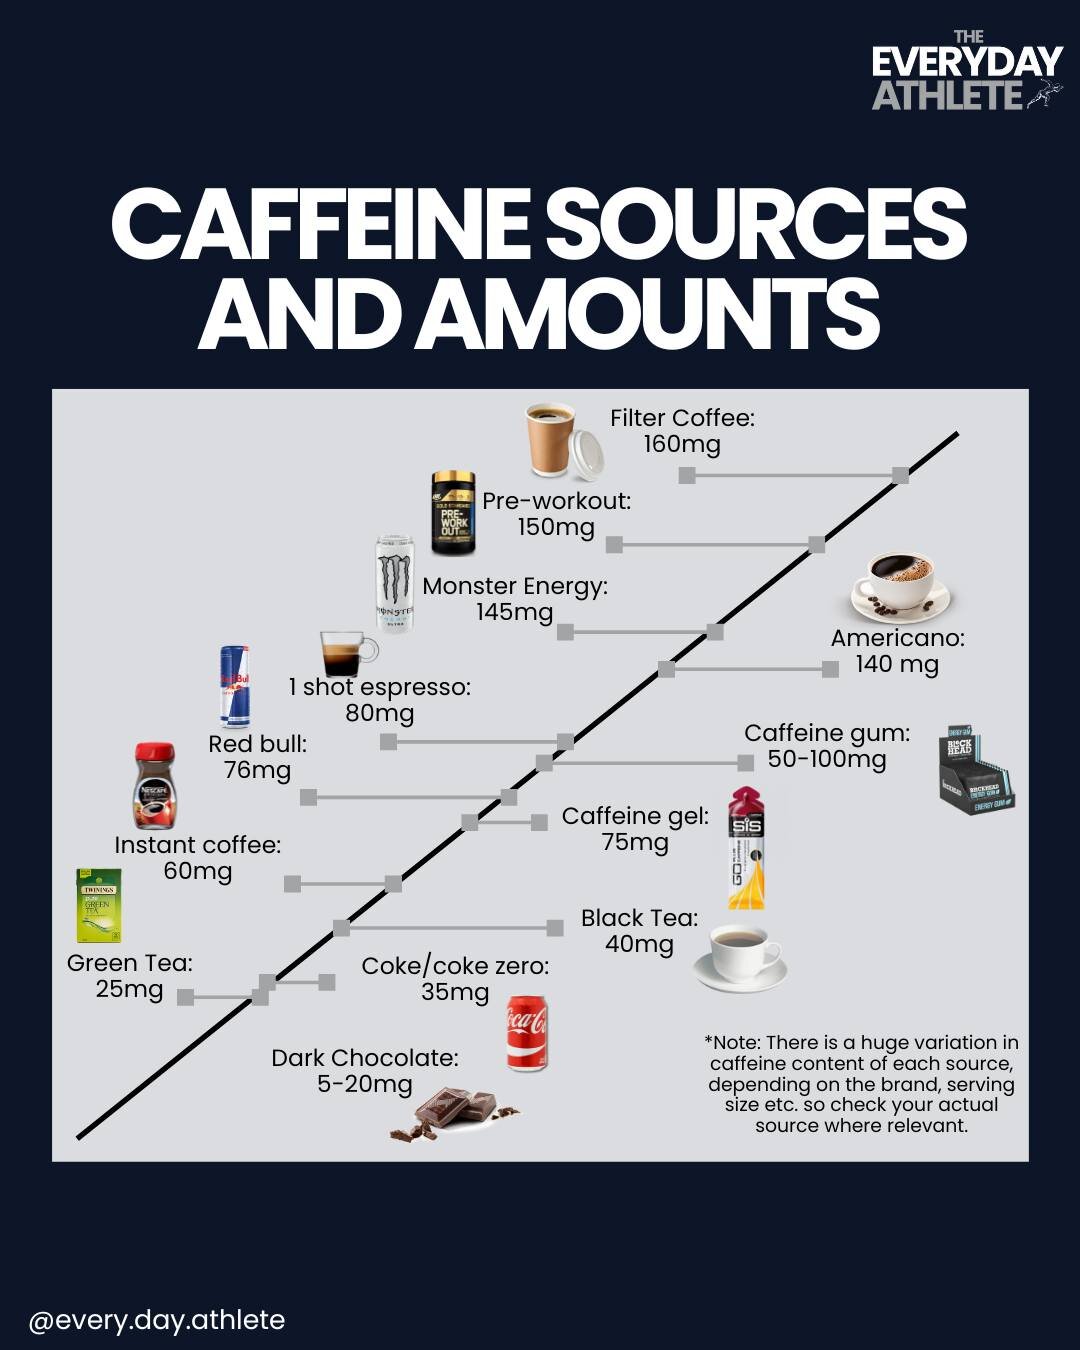 Do you use caffeine as a performance aid?⁠

Do you ever wonder if it's healthy/unhealthy?⁠

Are you unsure of whether or not you should be supplementing with caffeine?⁠

If you have any caffeine questions, ask below or send them via DM and I&rsquo;ll